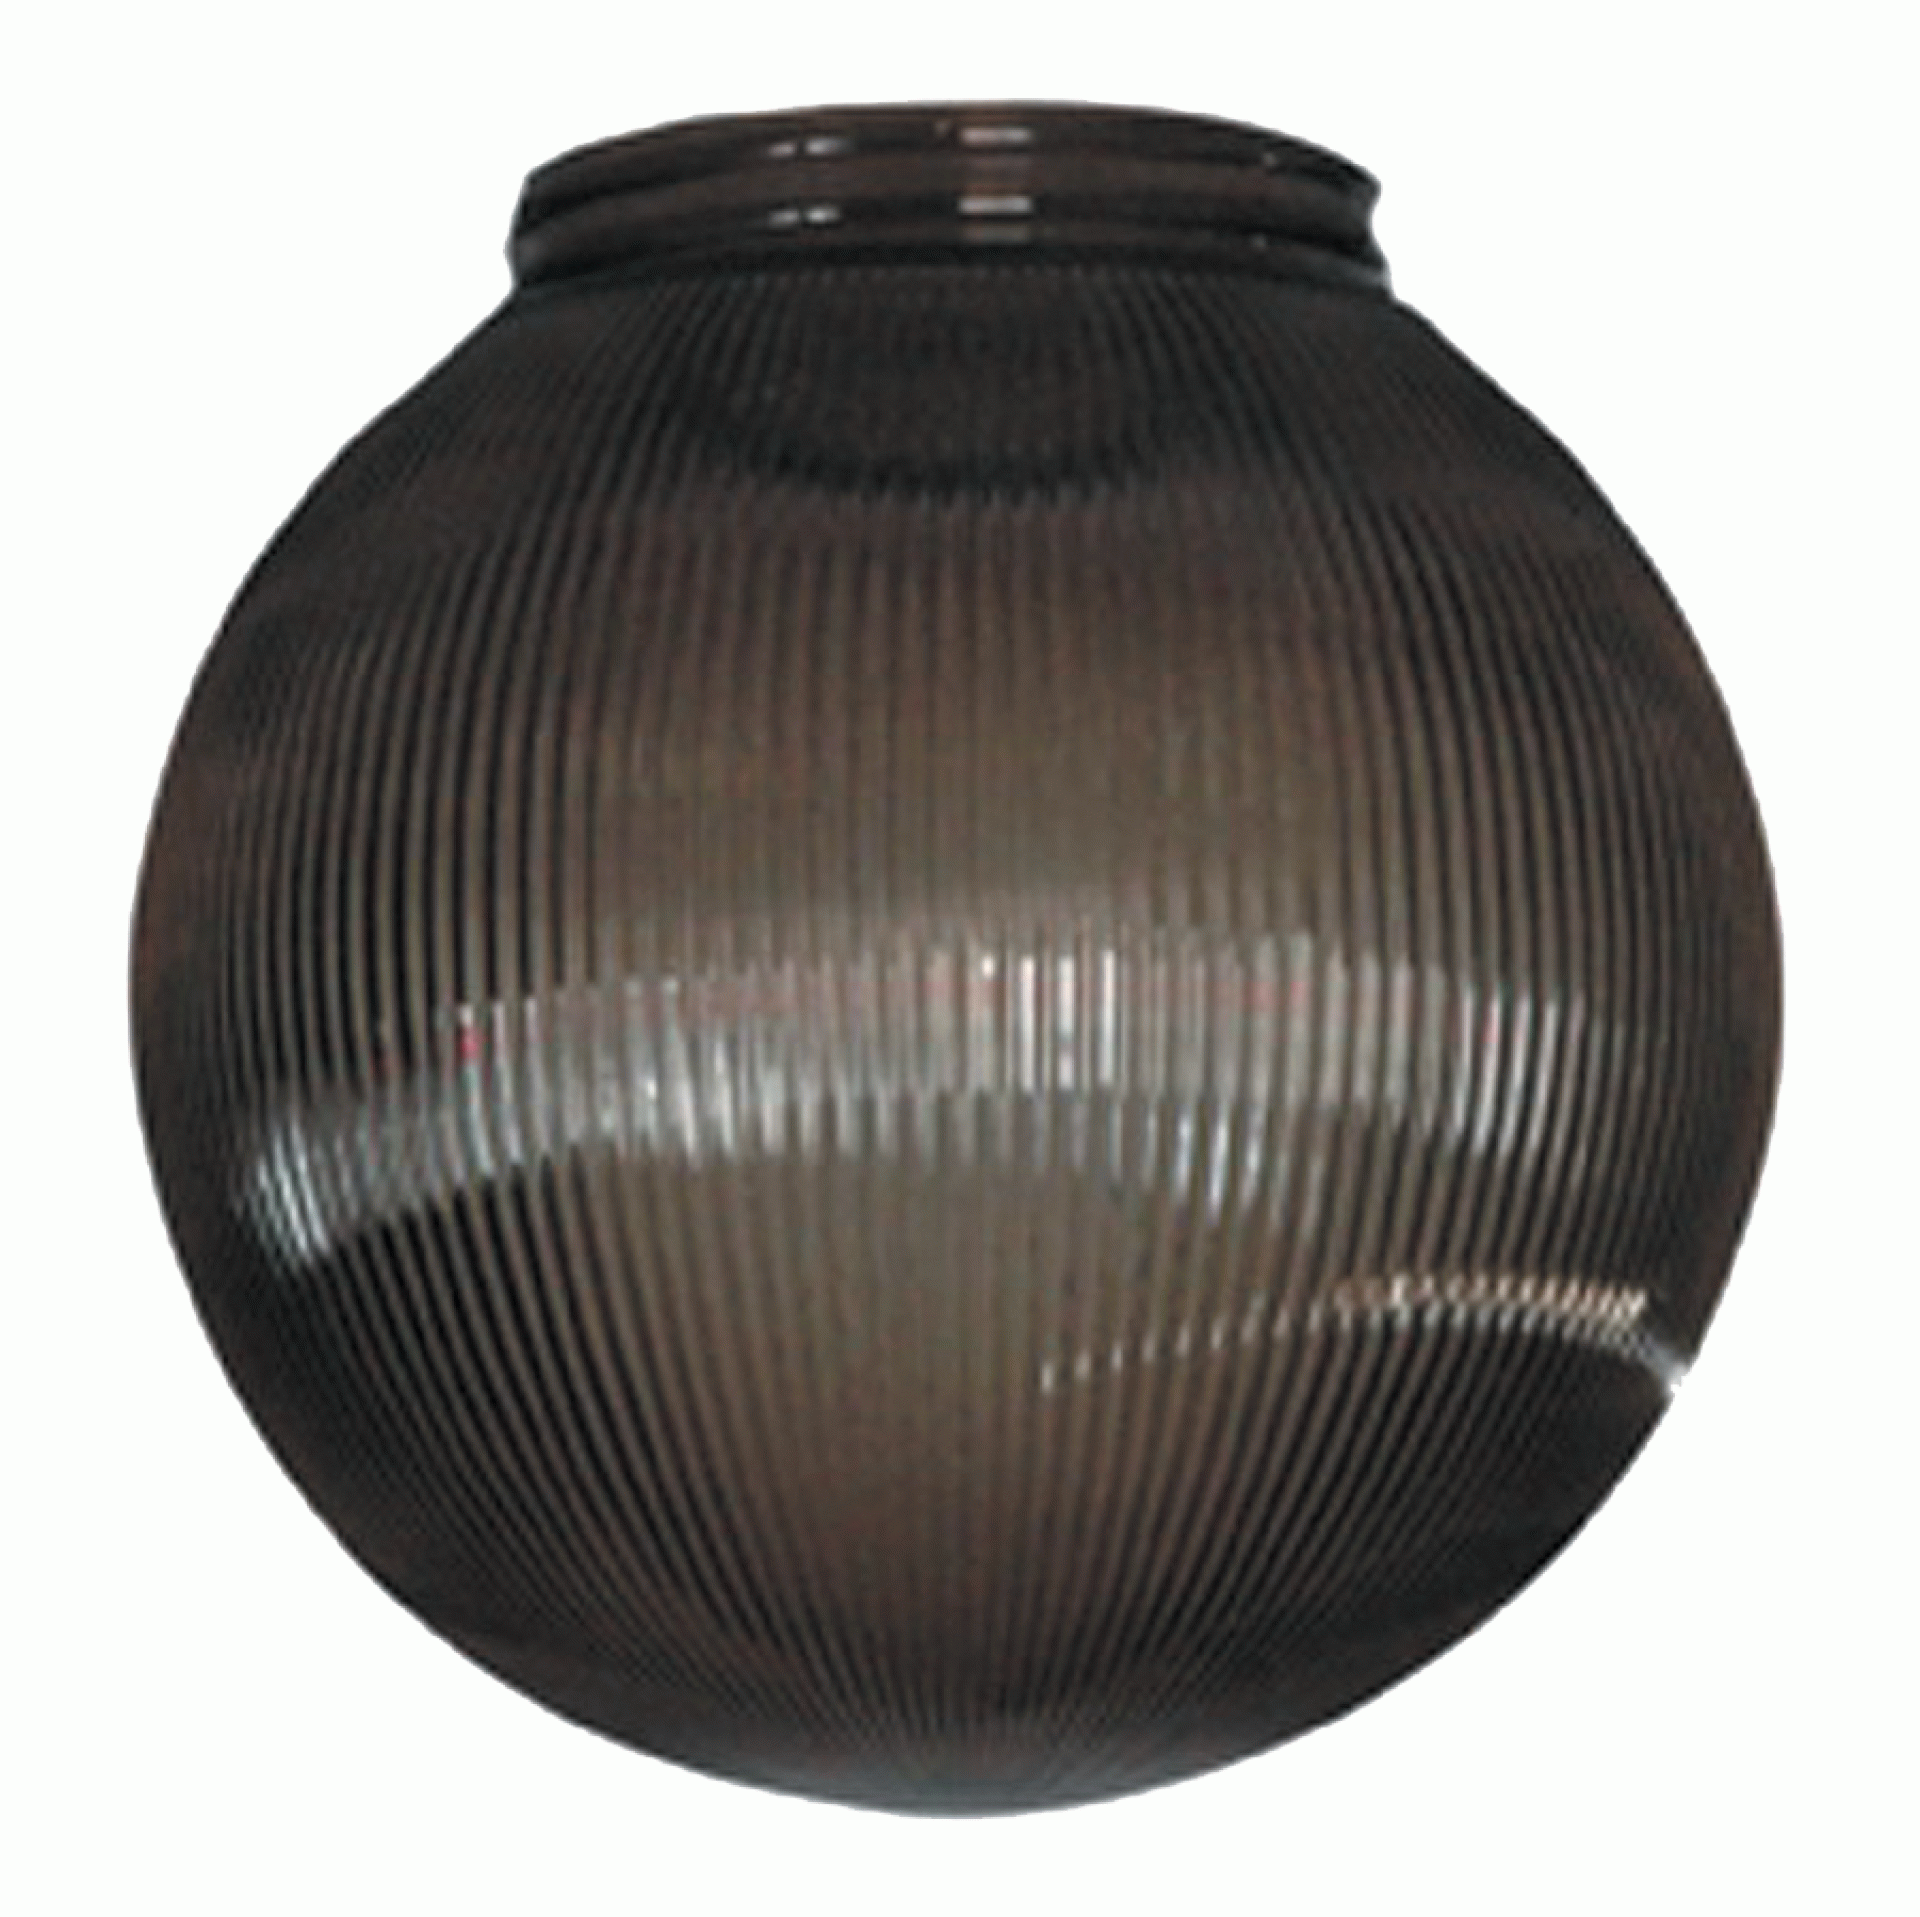 POLYMER PRODUCT LLC. | 3203-51630 | REPLACEMENT GLOBE - BRONZE